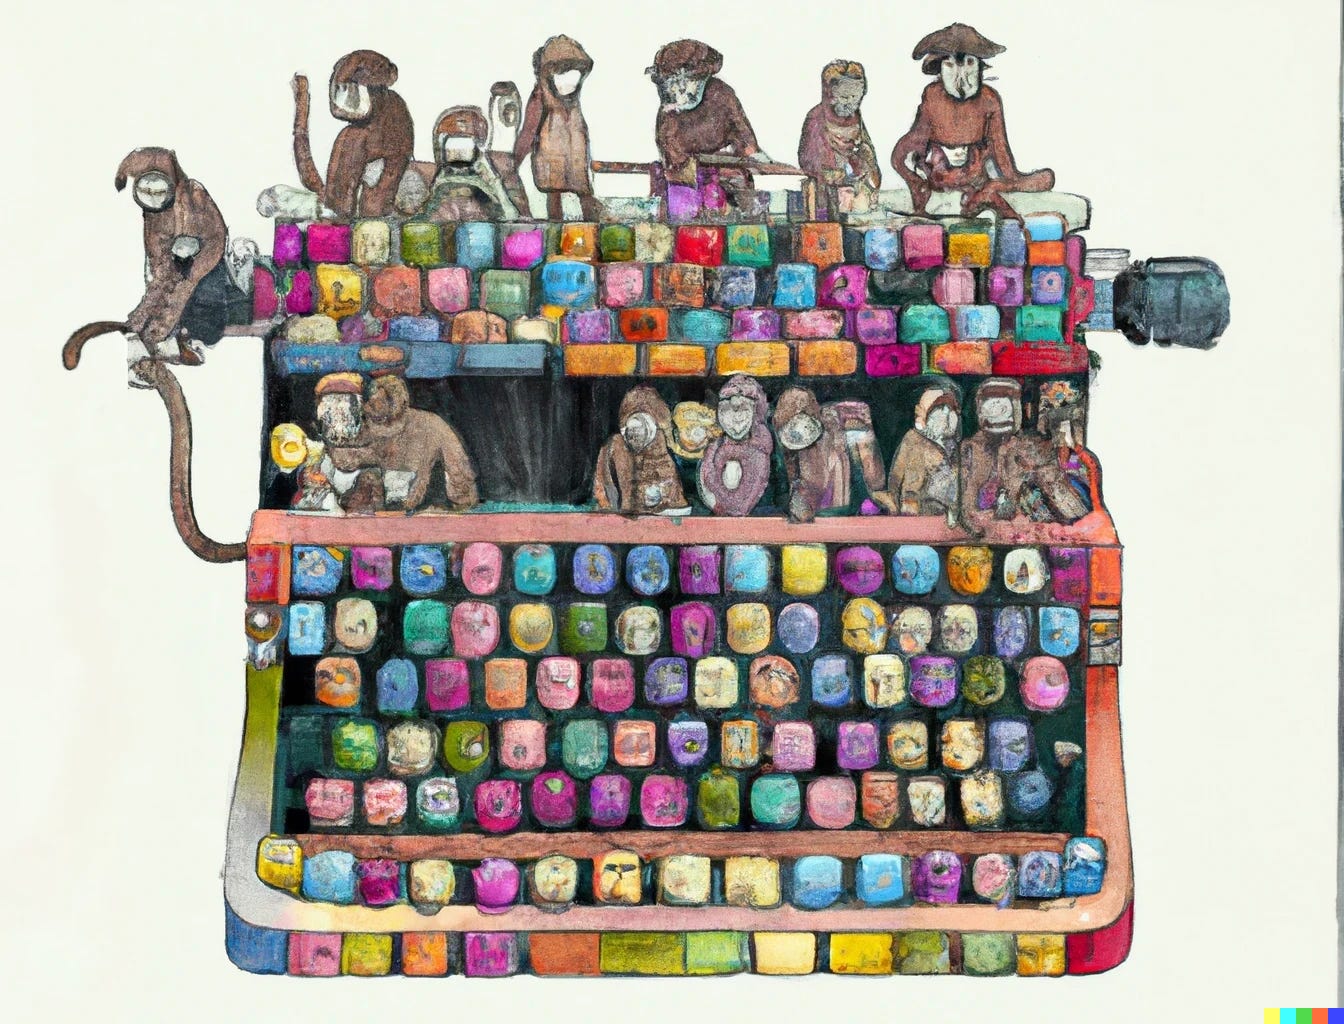 Coloful painting of monkeys on a typewriter